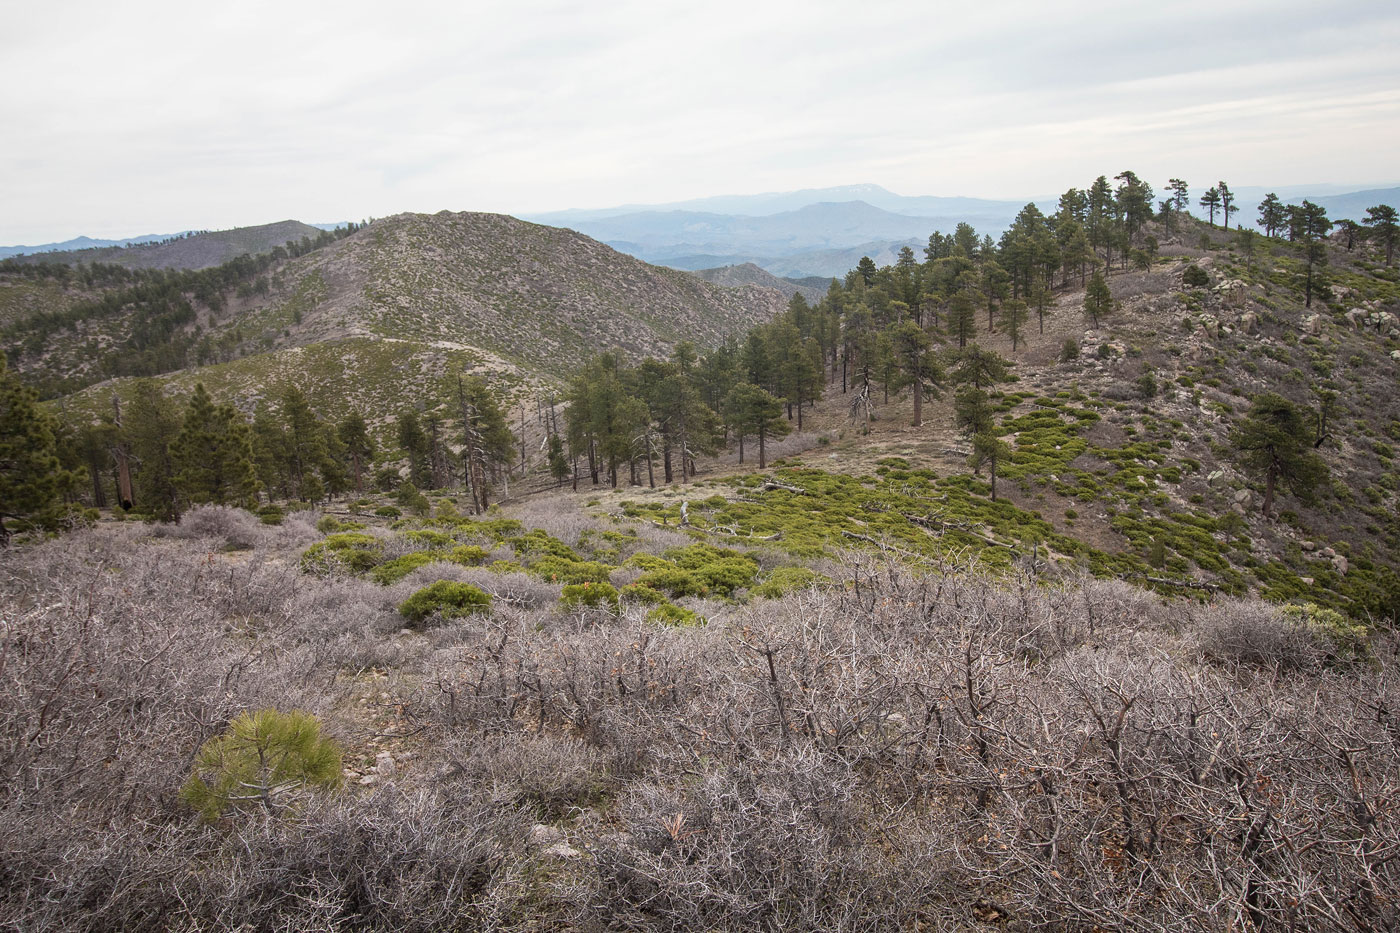 Hike Sawmill Mountain and Jacks Mountain Loop in Clover Mountains Wilderness BLM, Nevada - Stav is Lost